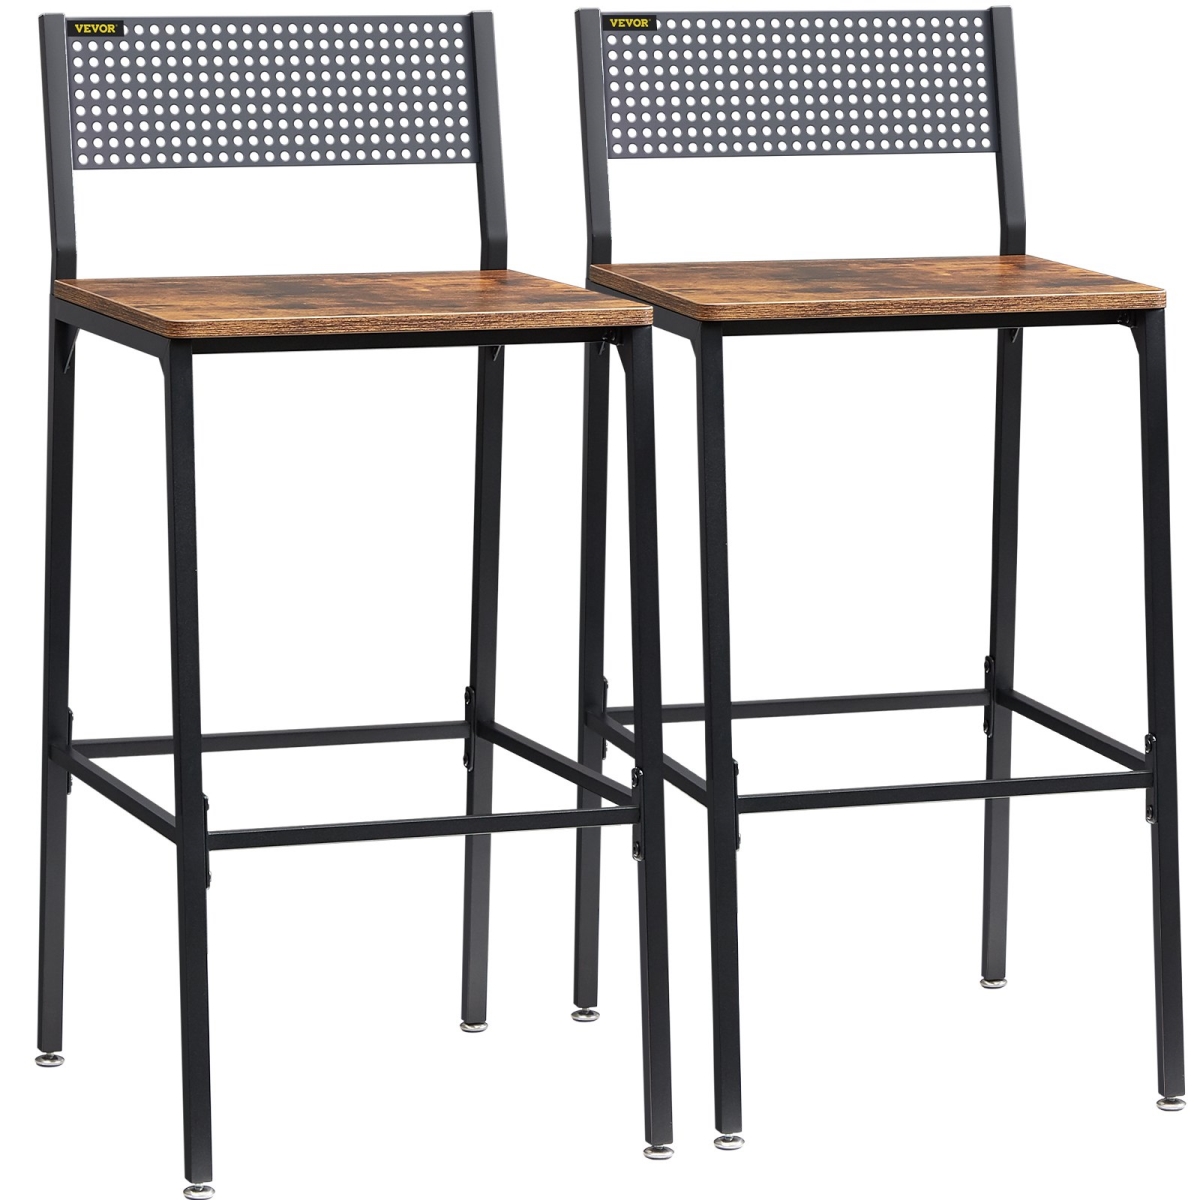 Picture of Vevor TMKBBTDFZDFGZ25YWV0 29 in. Rustic Bar Stools Counter Height Square Bar Chairs with Backrest - 2 Set